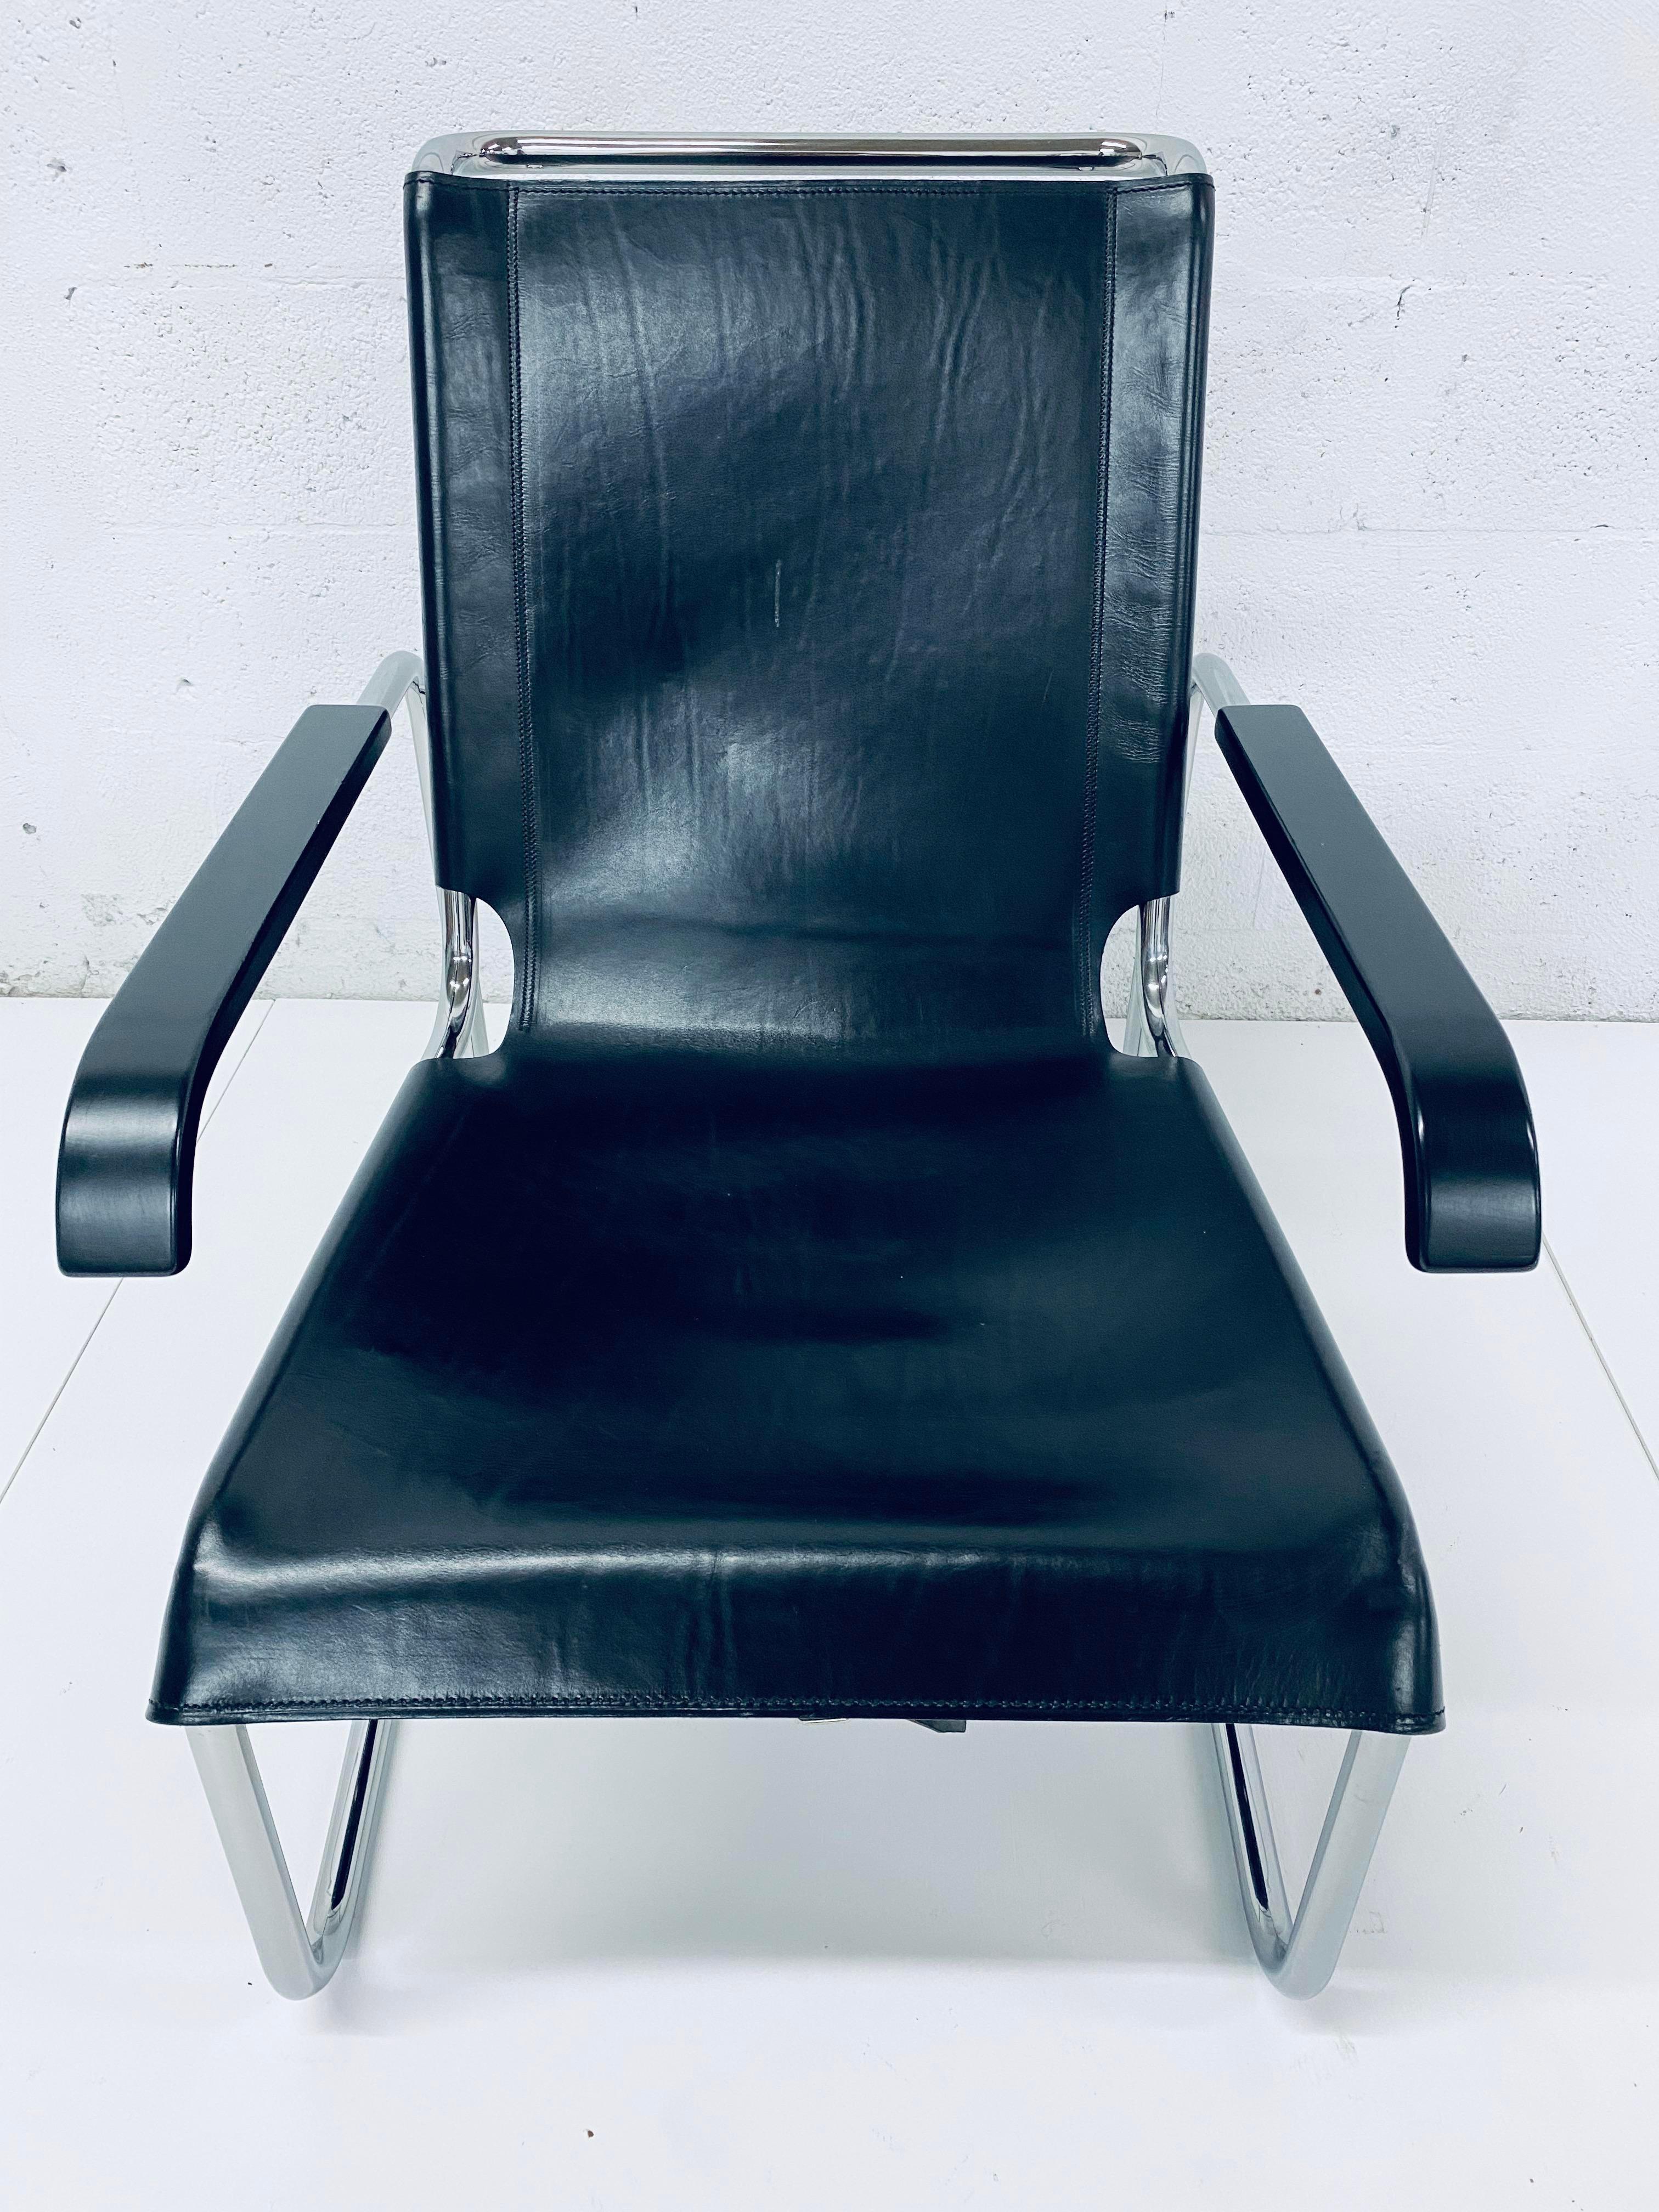 Black leather with chrome plated steel tube frame S 35 L lounge chair originally designed by Marcel Breuer for Gerbruder Thonet in 1928 and later imported by ICF in the 1960s.  Often times referred to as the B35 Chair.  Leather buckles on underside